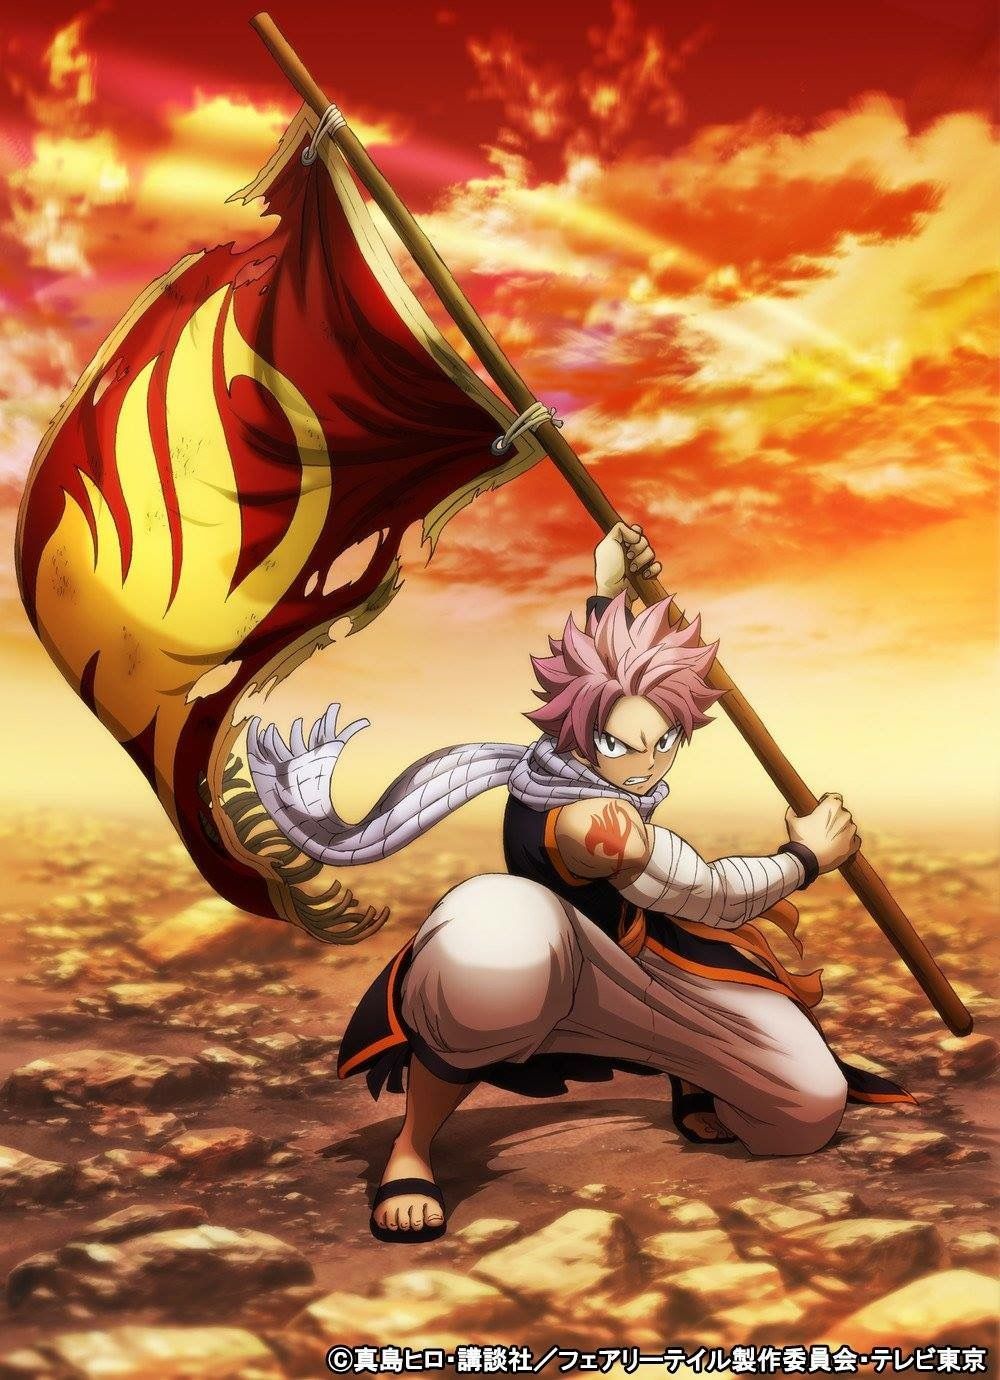 Fairy Tail Flag Wallpapers Kolpaper Awesome Free Hd Wallpapers